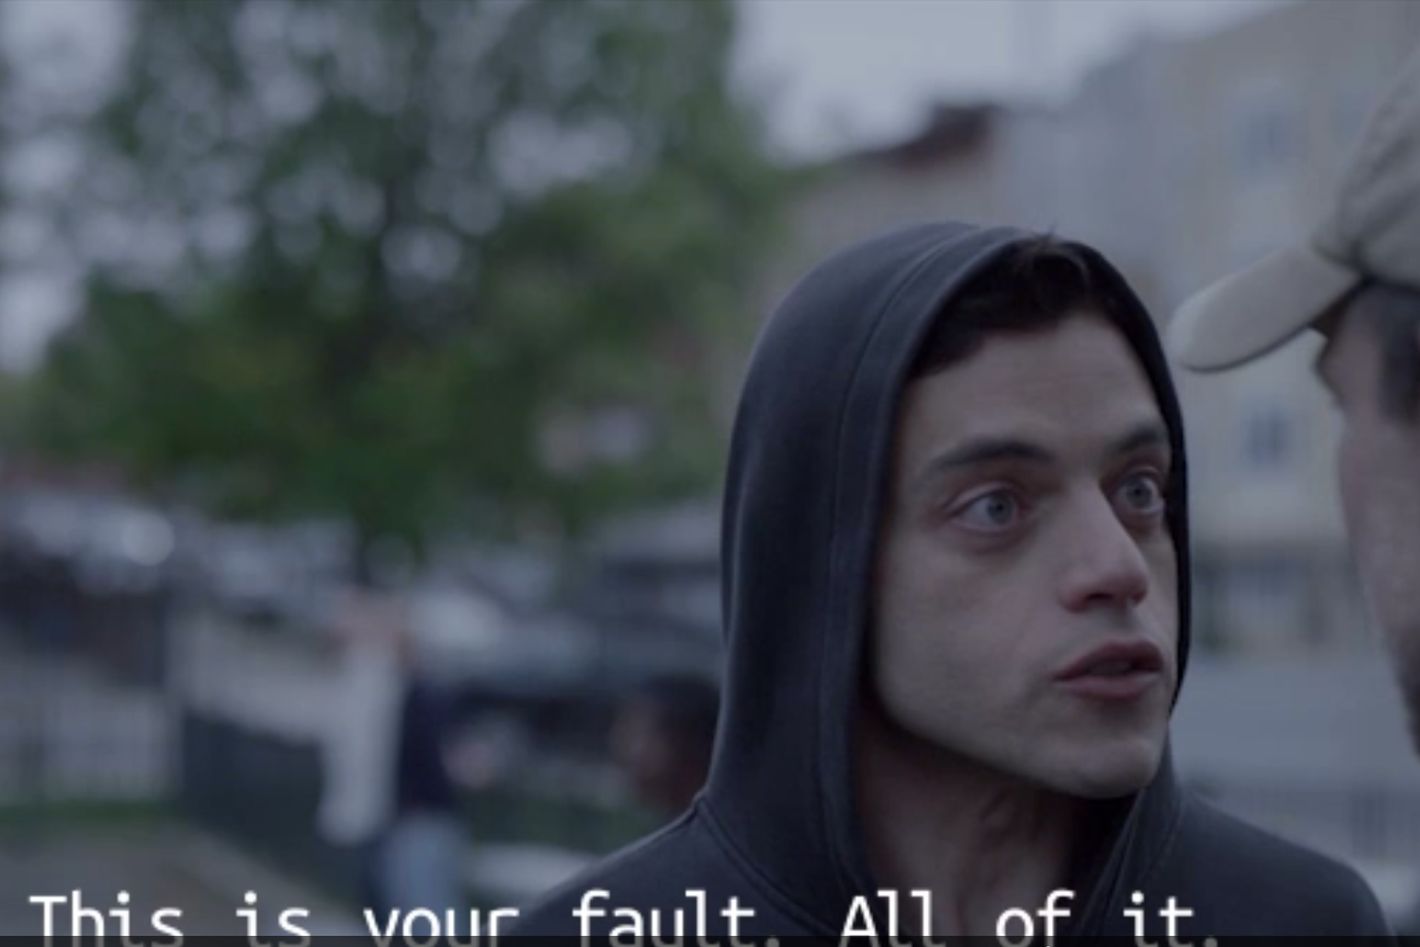 Mr. Robot Season 2 Trailer: Even Obama's Worried About Fsociety